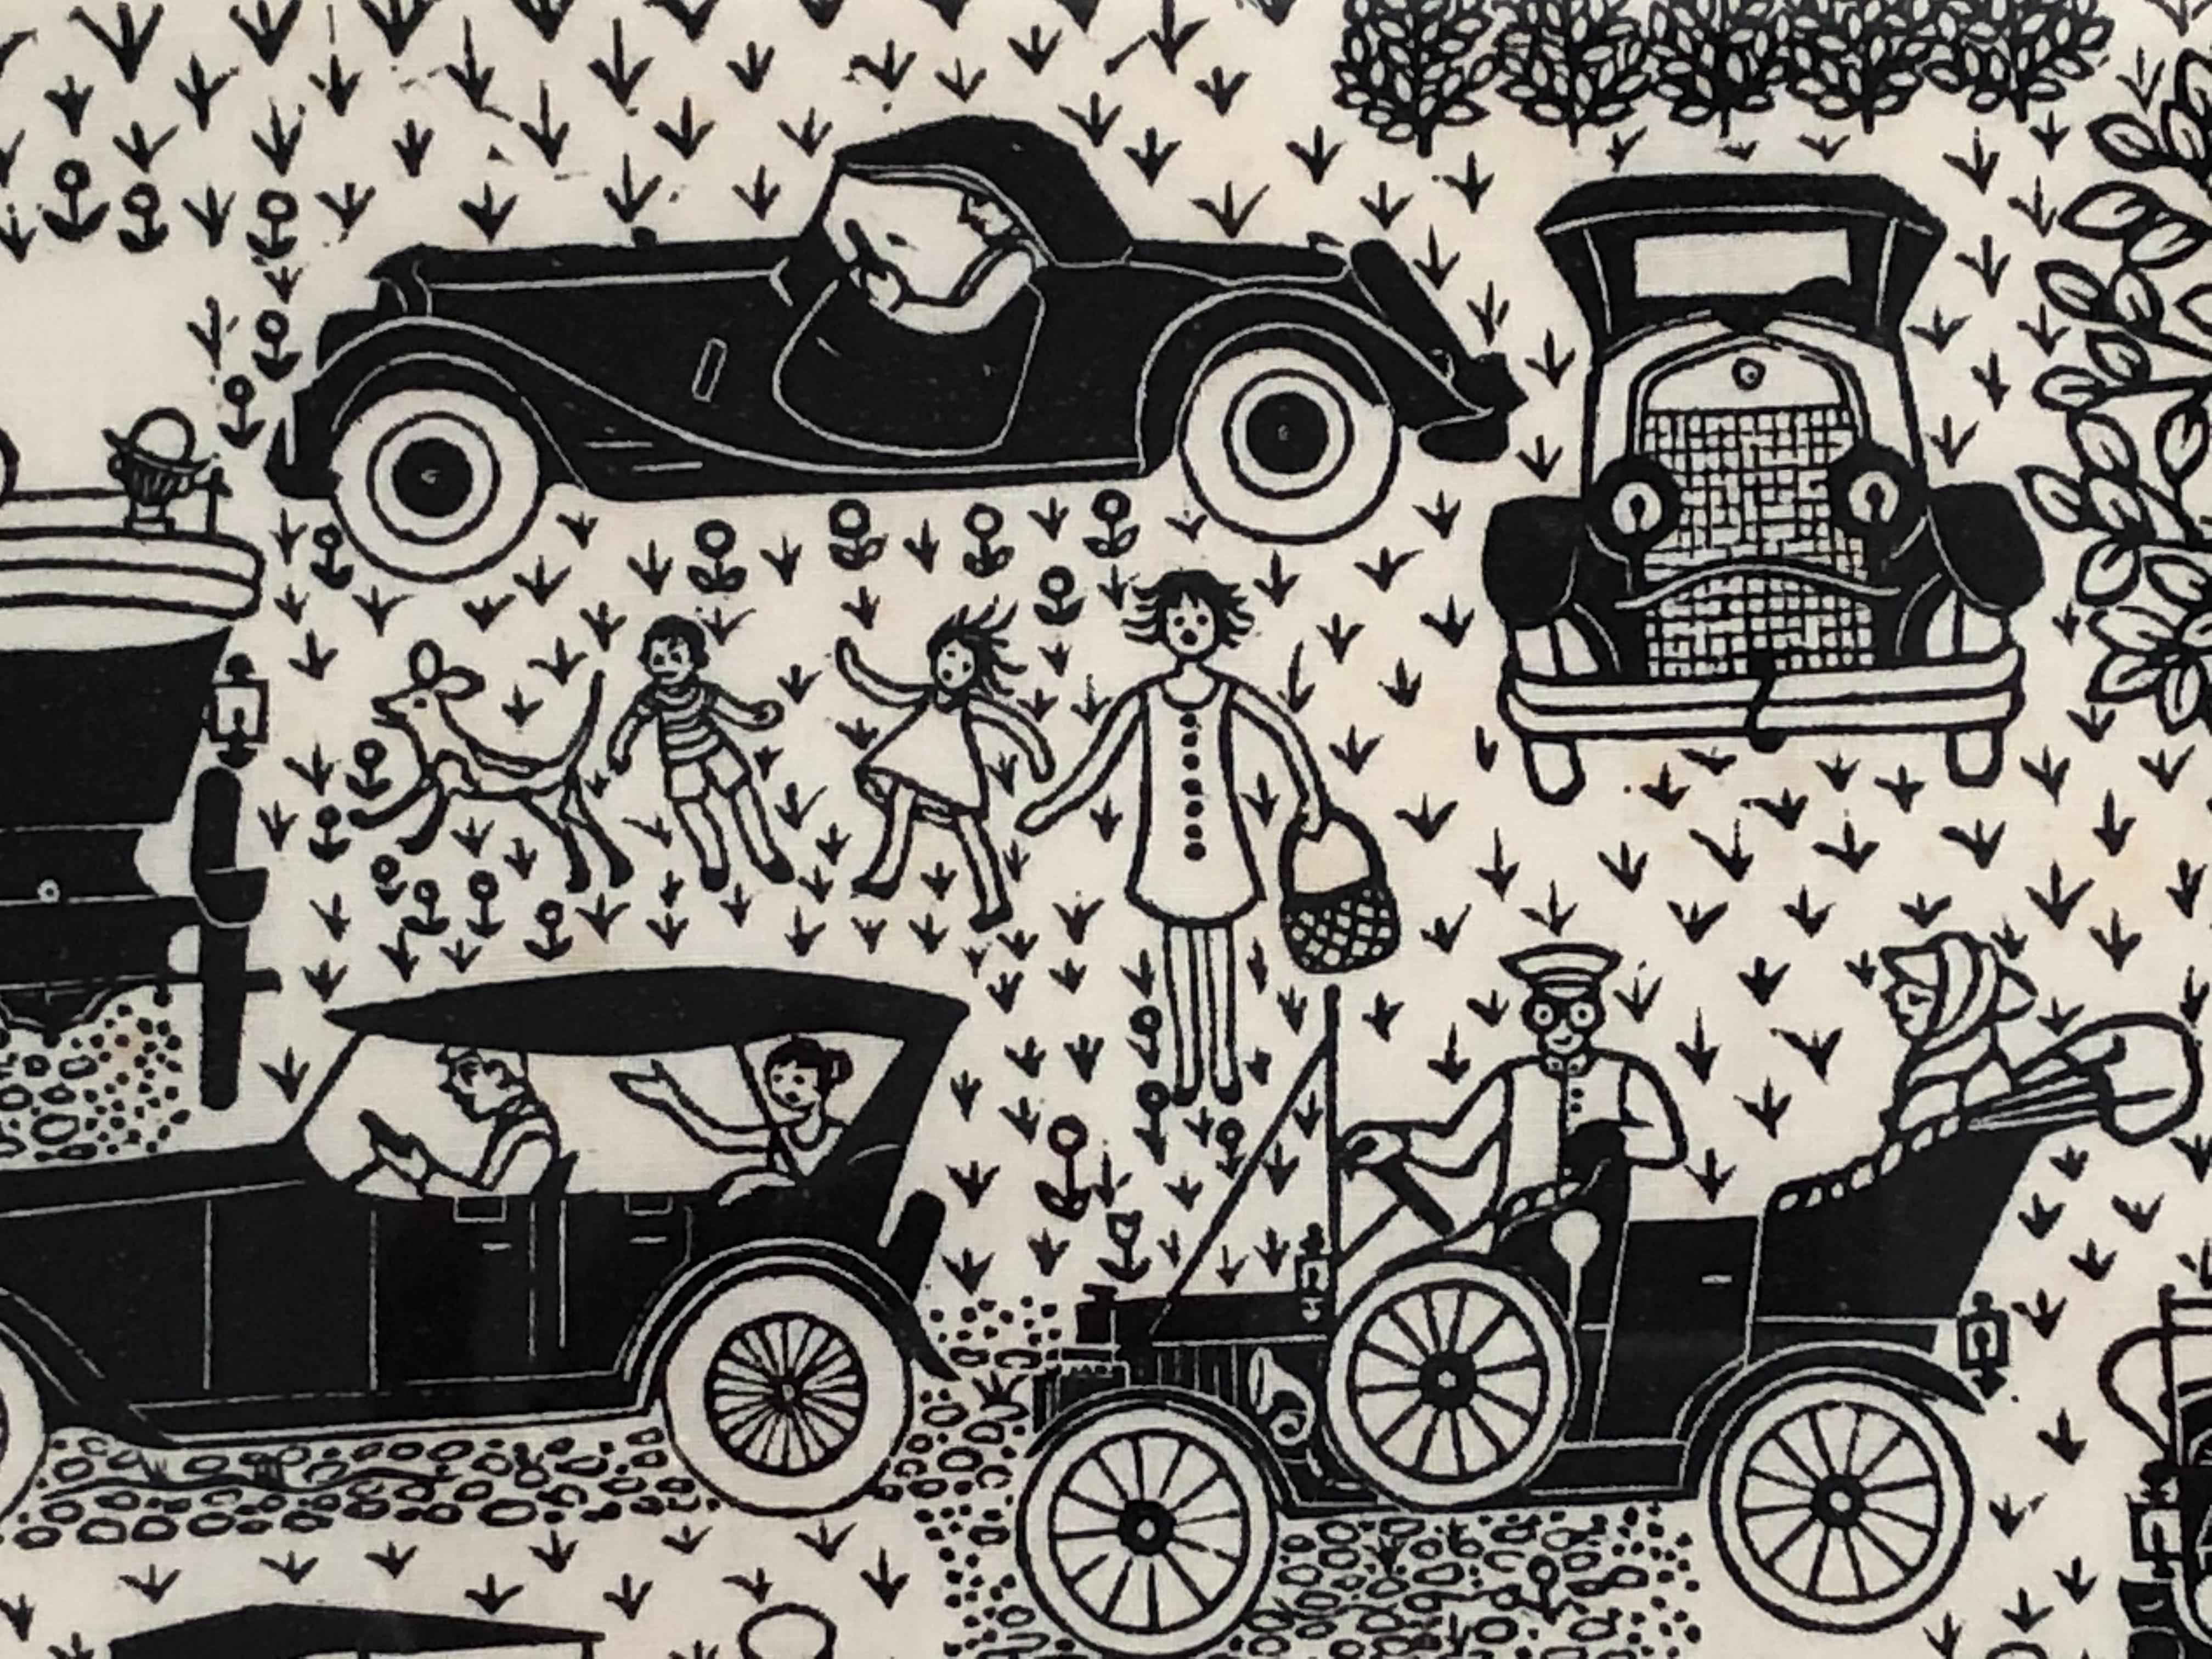 Folly Cove Designers Hand Block Printed Textile with Antique Automobiles 1